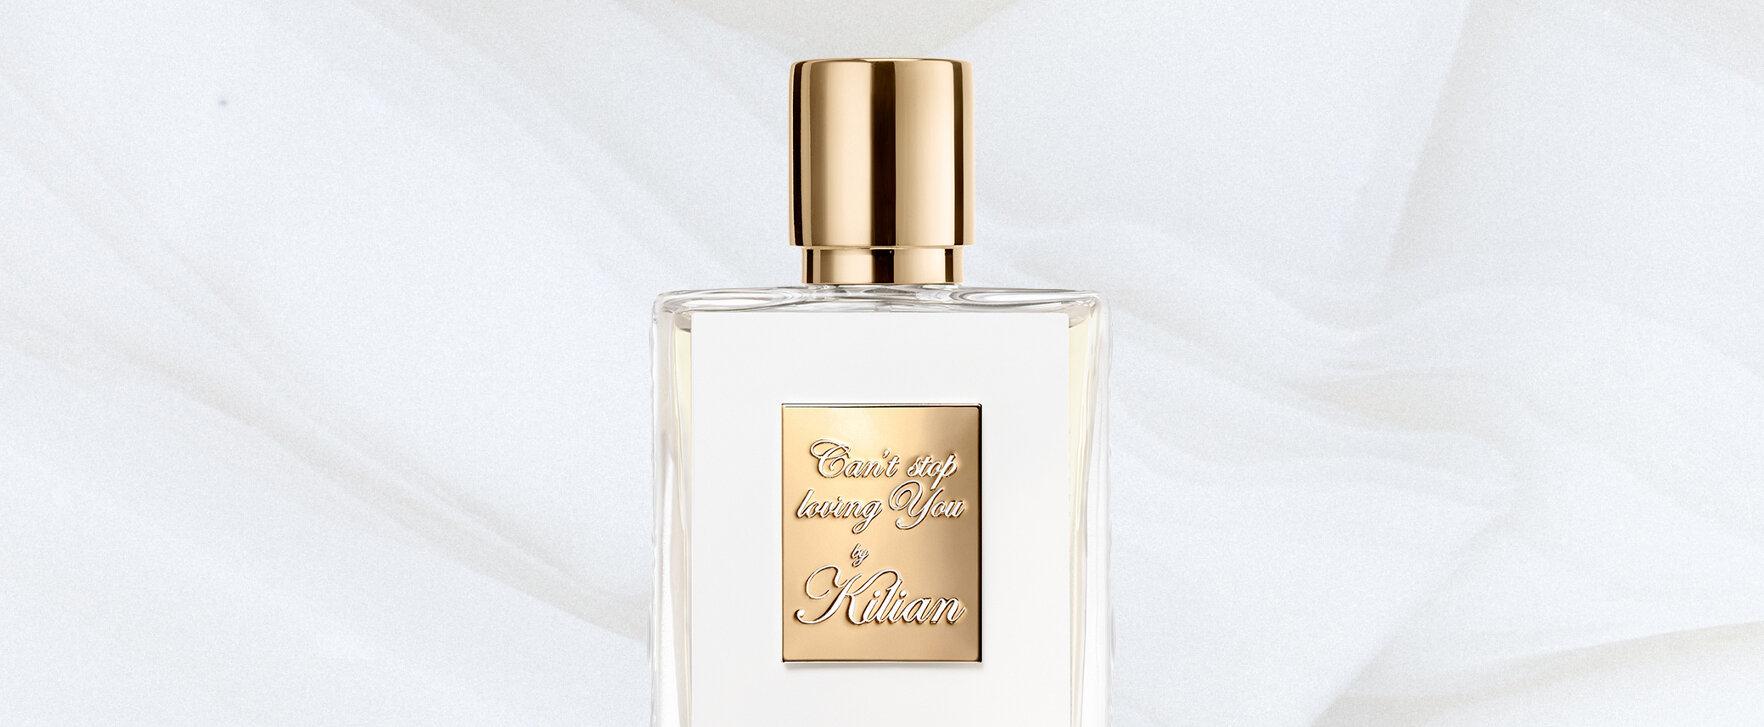 Kilian Launches “Can’t Stop Loving You”, a Luxurious, Olfactory Declaration of Love